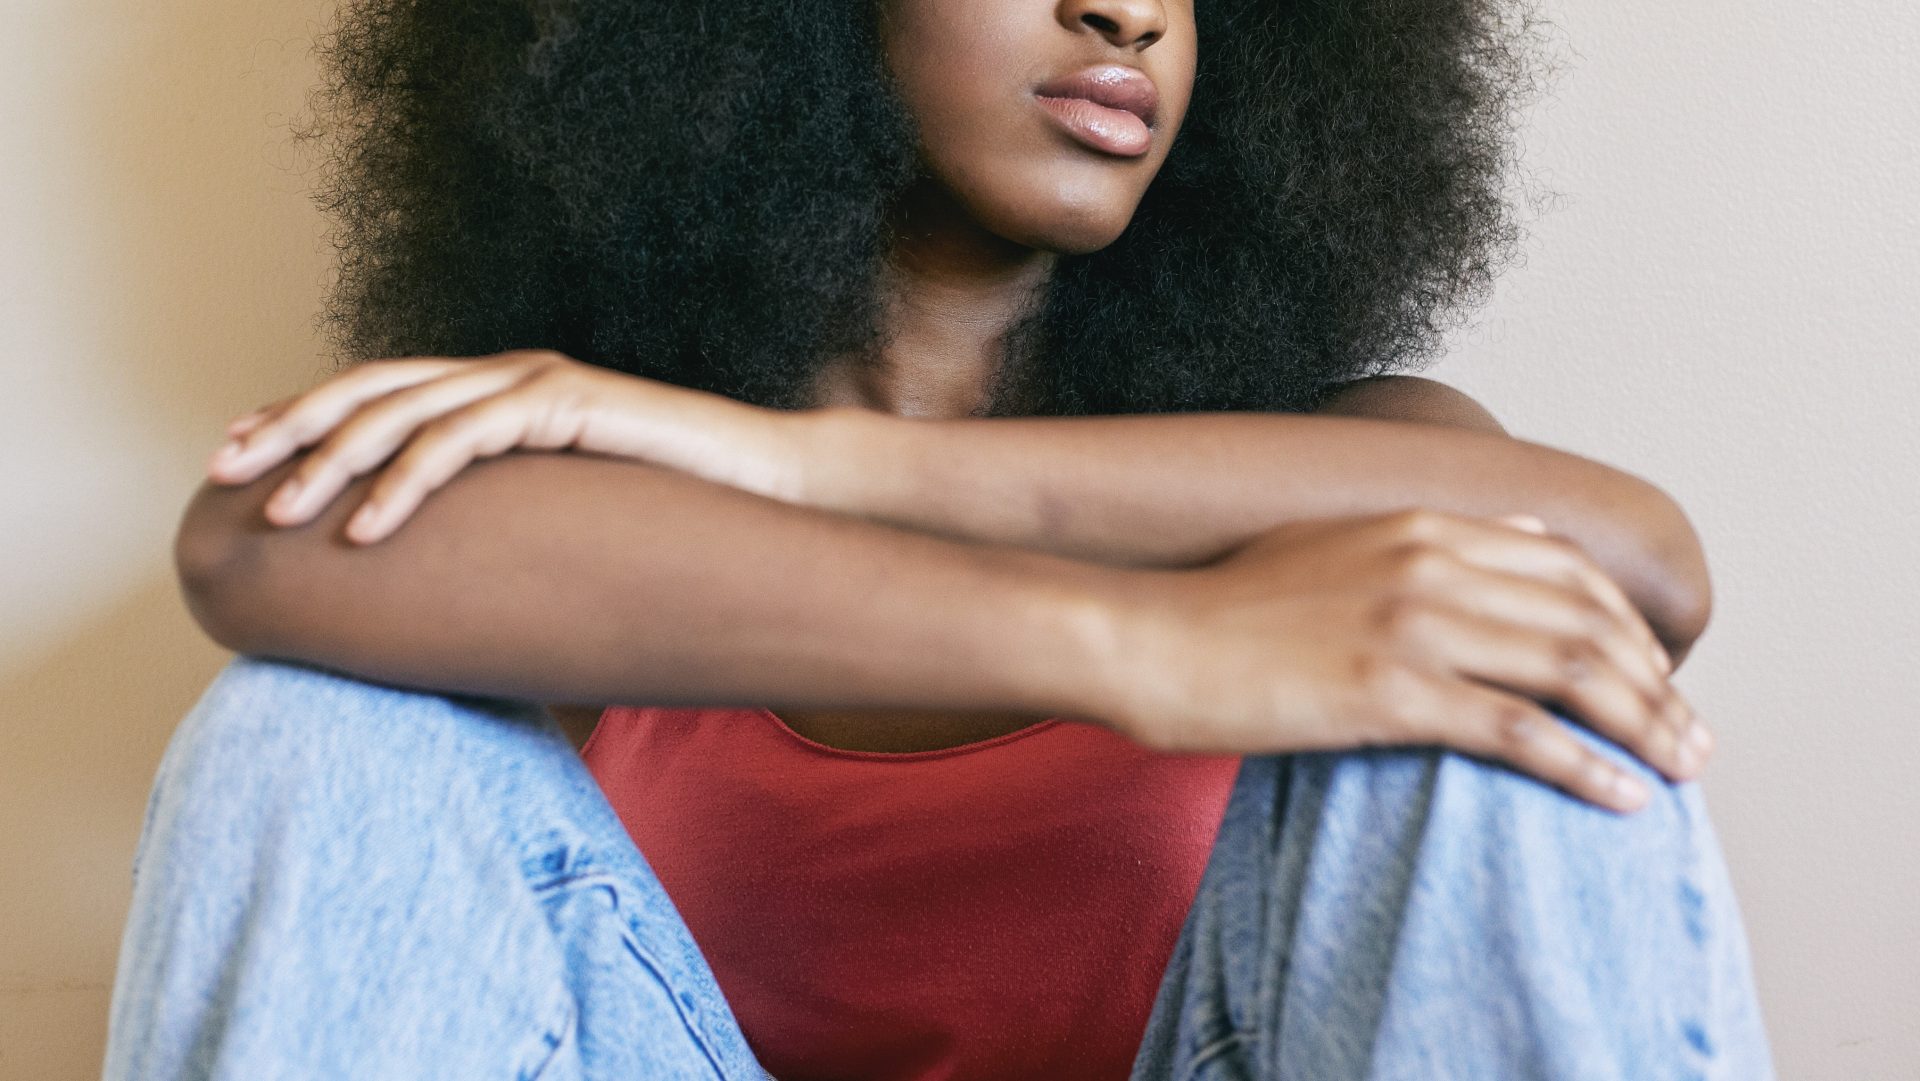 Study Suggests Black Women Experience Depression Differently